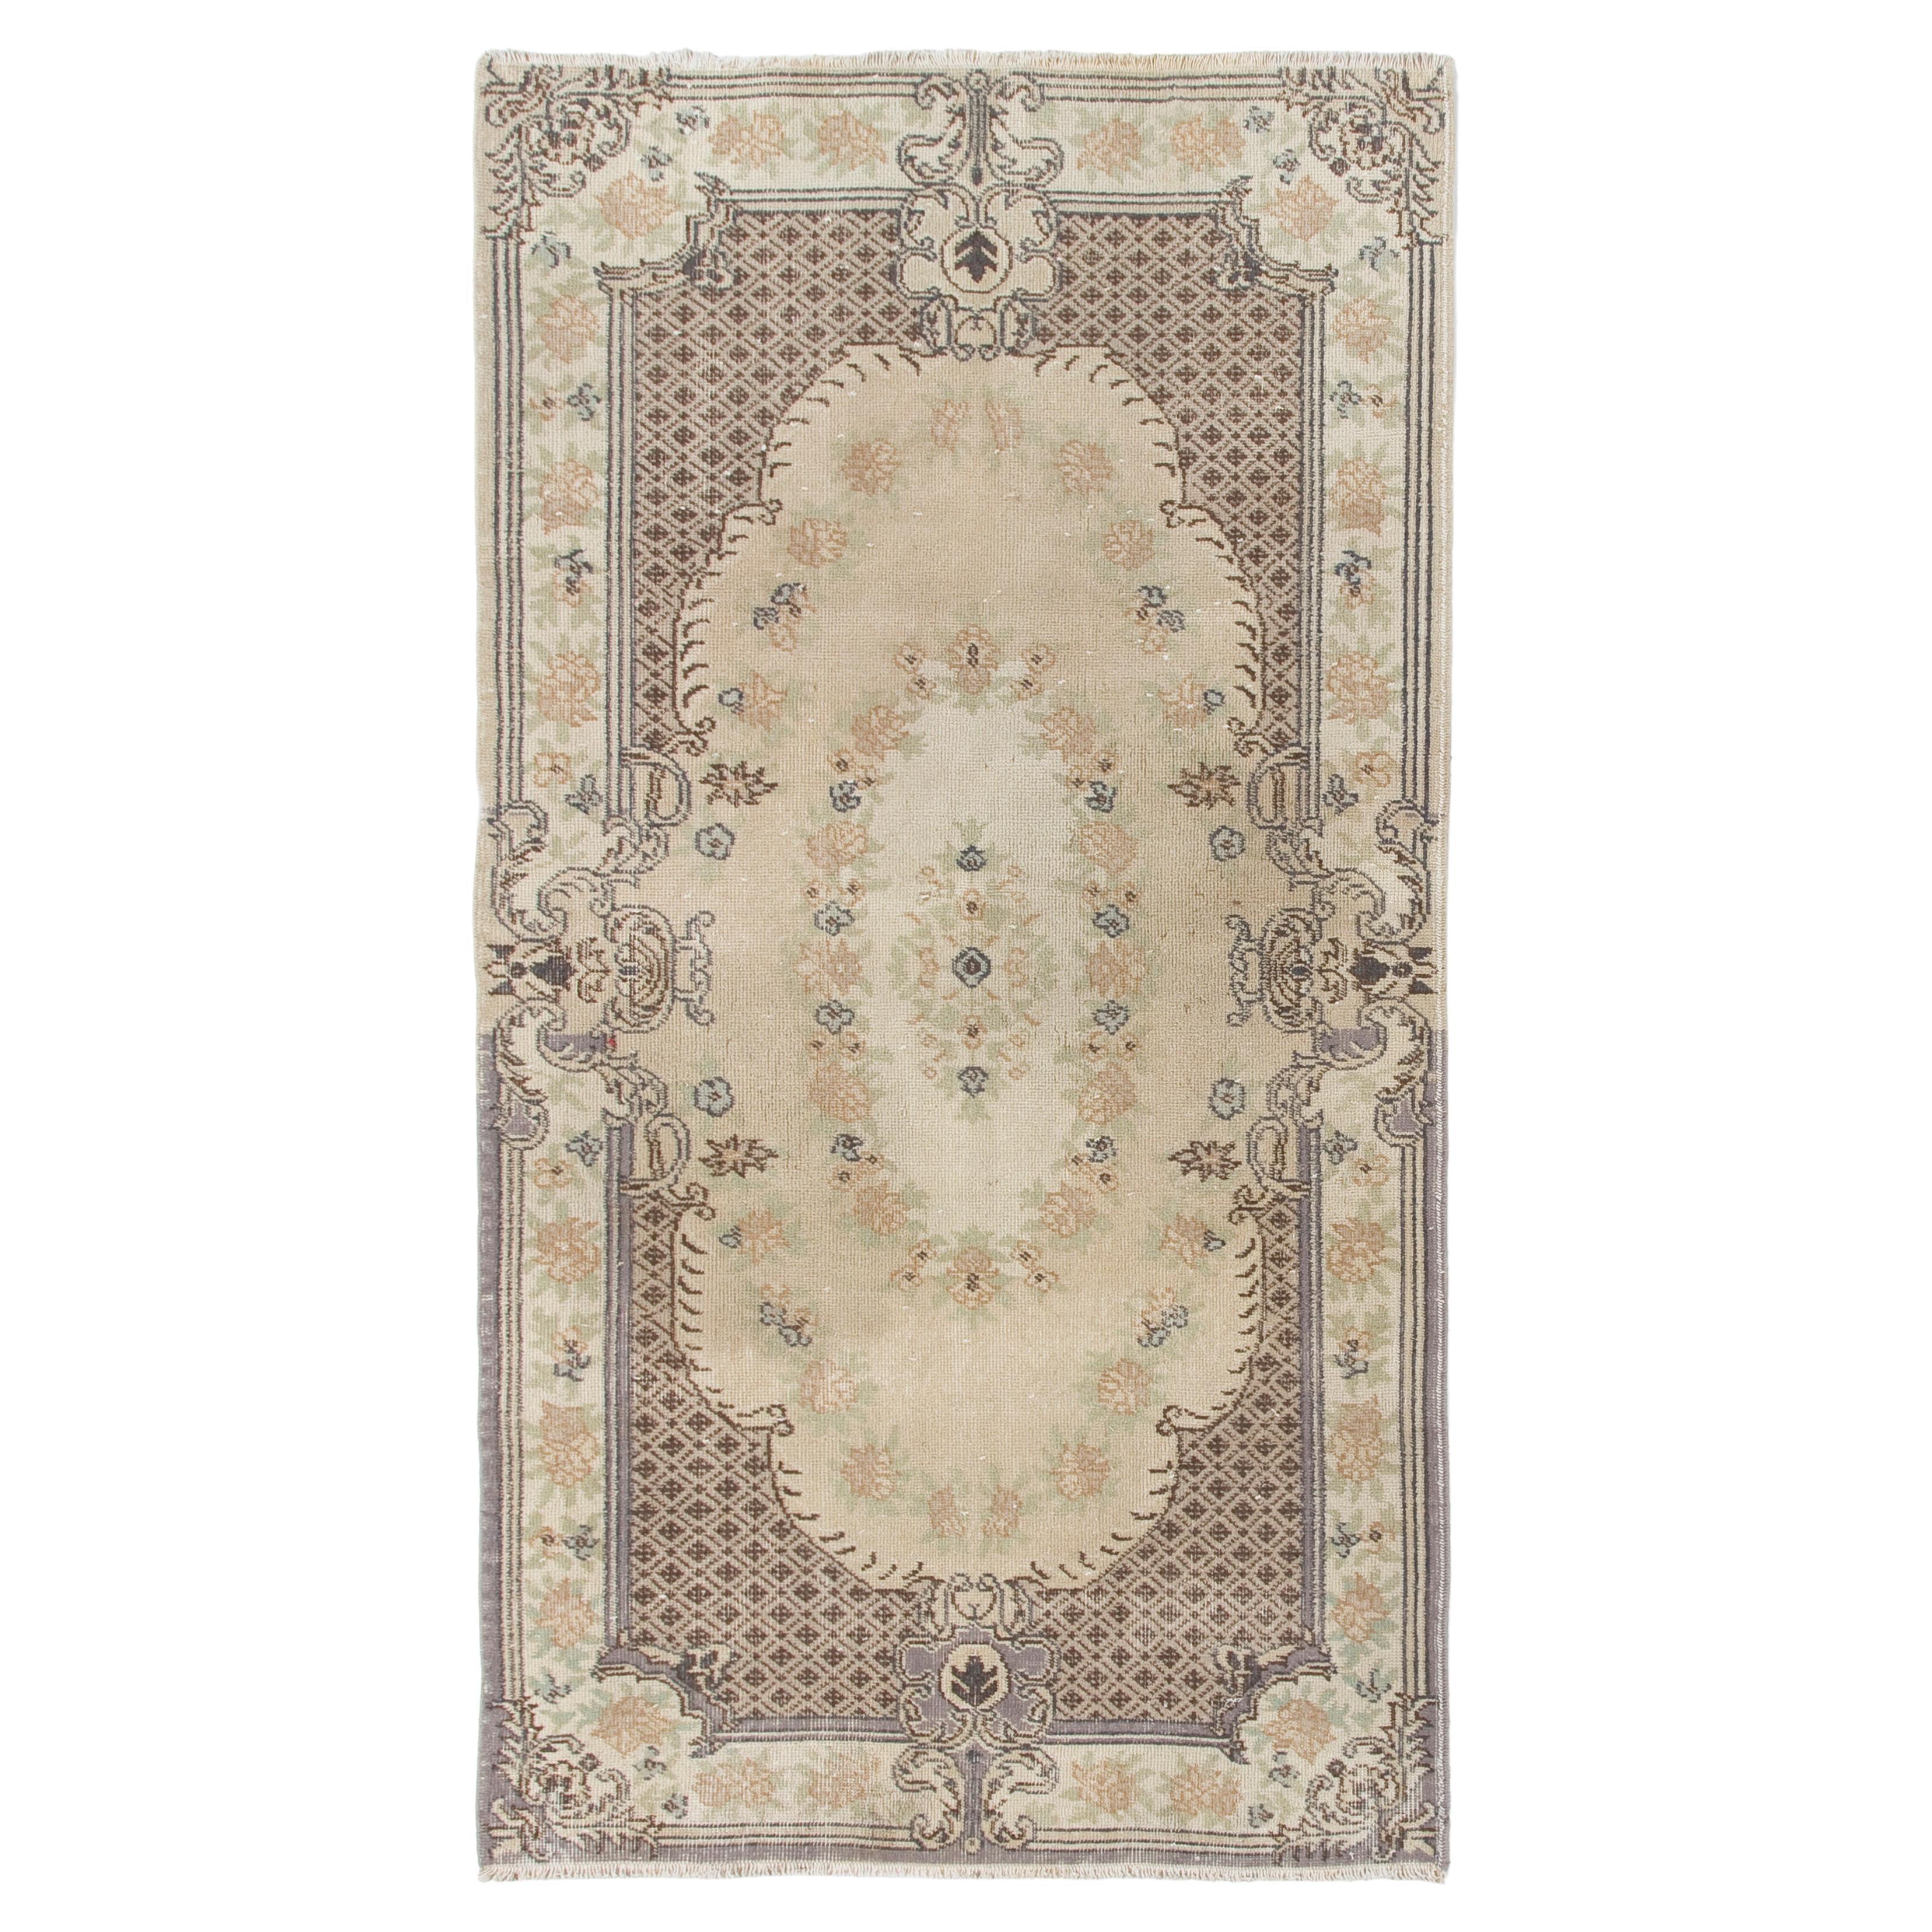 3.8x7 Ft Vintage Hand-Knotted Aubusson-Inspired Turkish Wool Rug in Beige For Sale